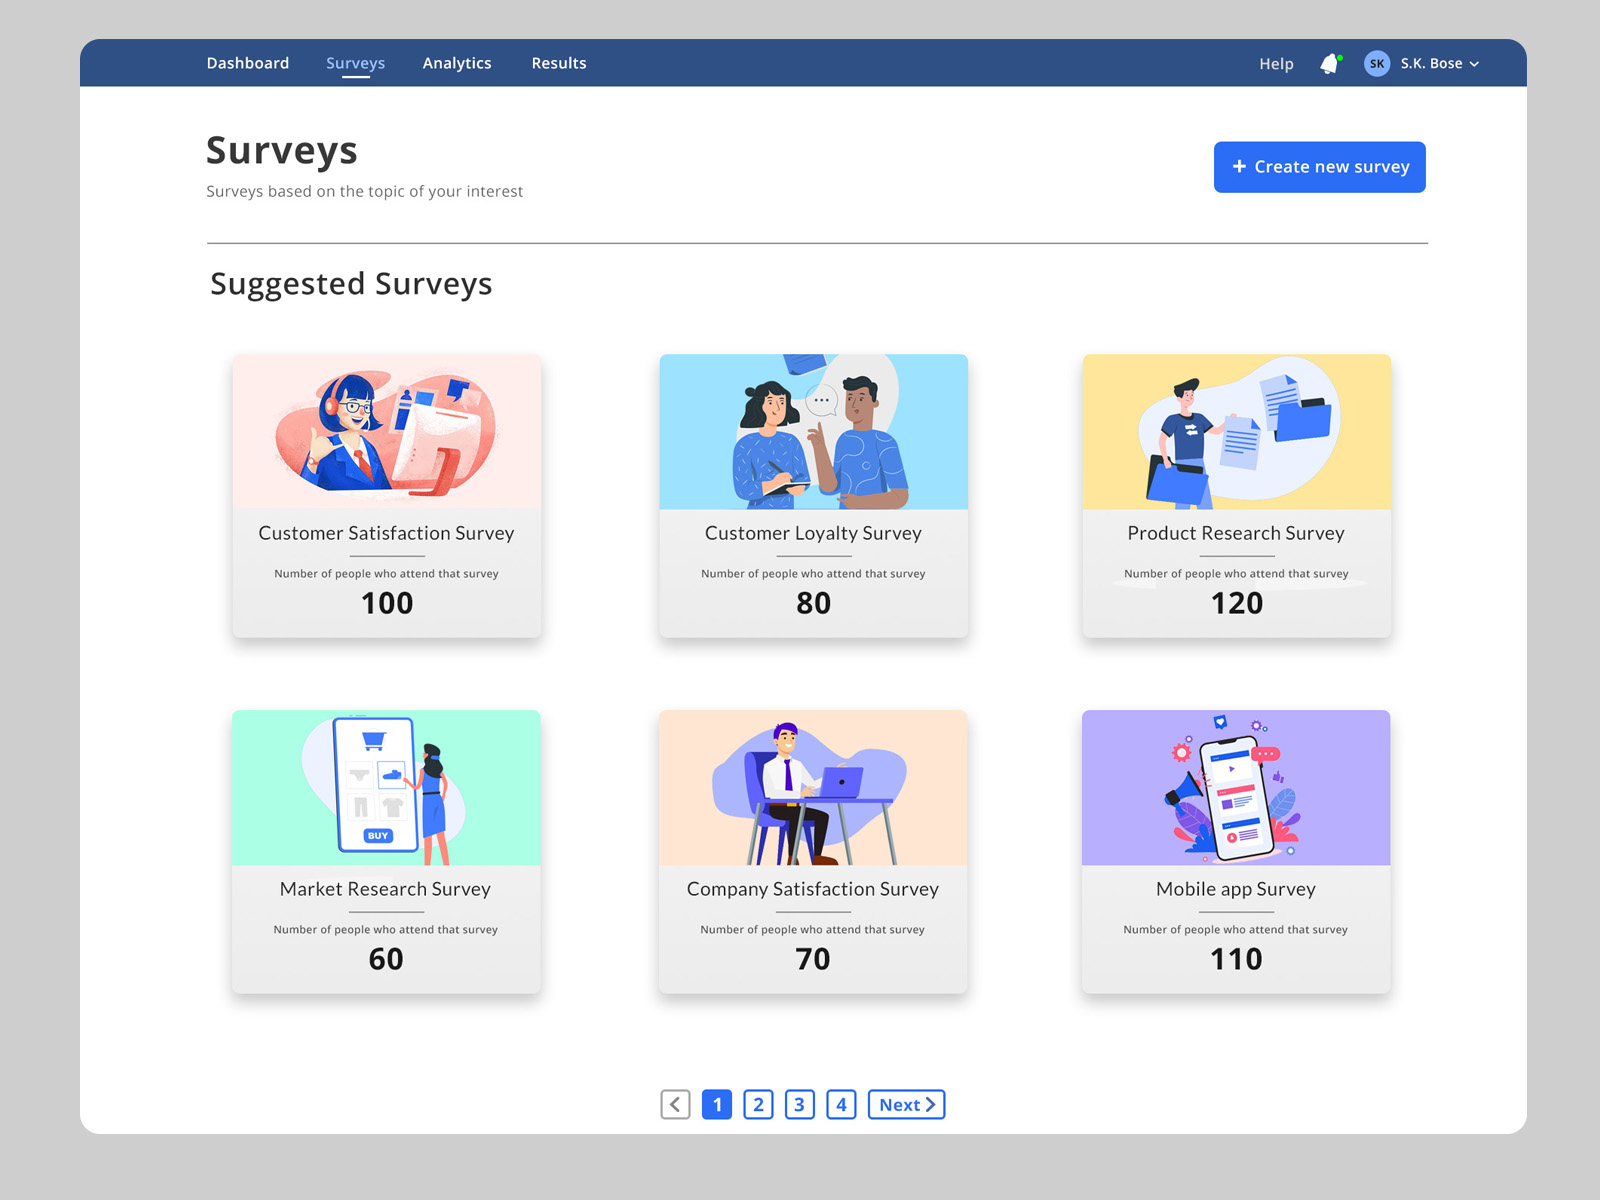 Survey card template Web UI by Somasree Chakraborty on Dribbble For Survey Card Template